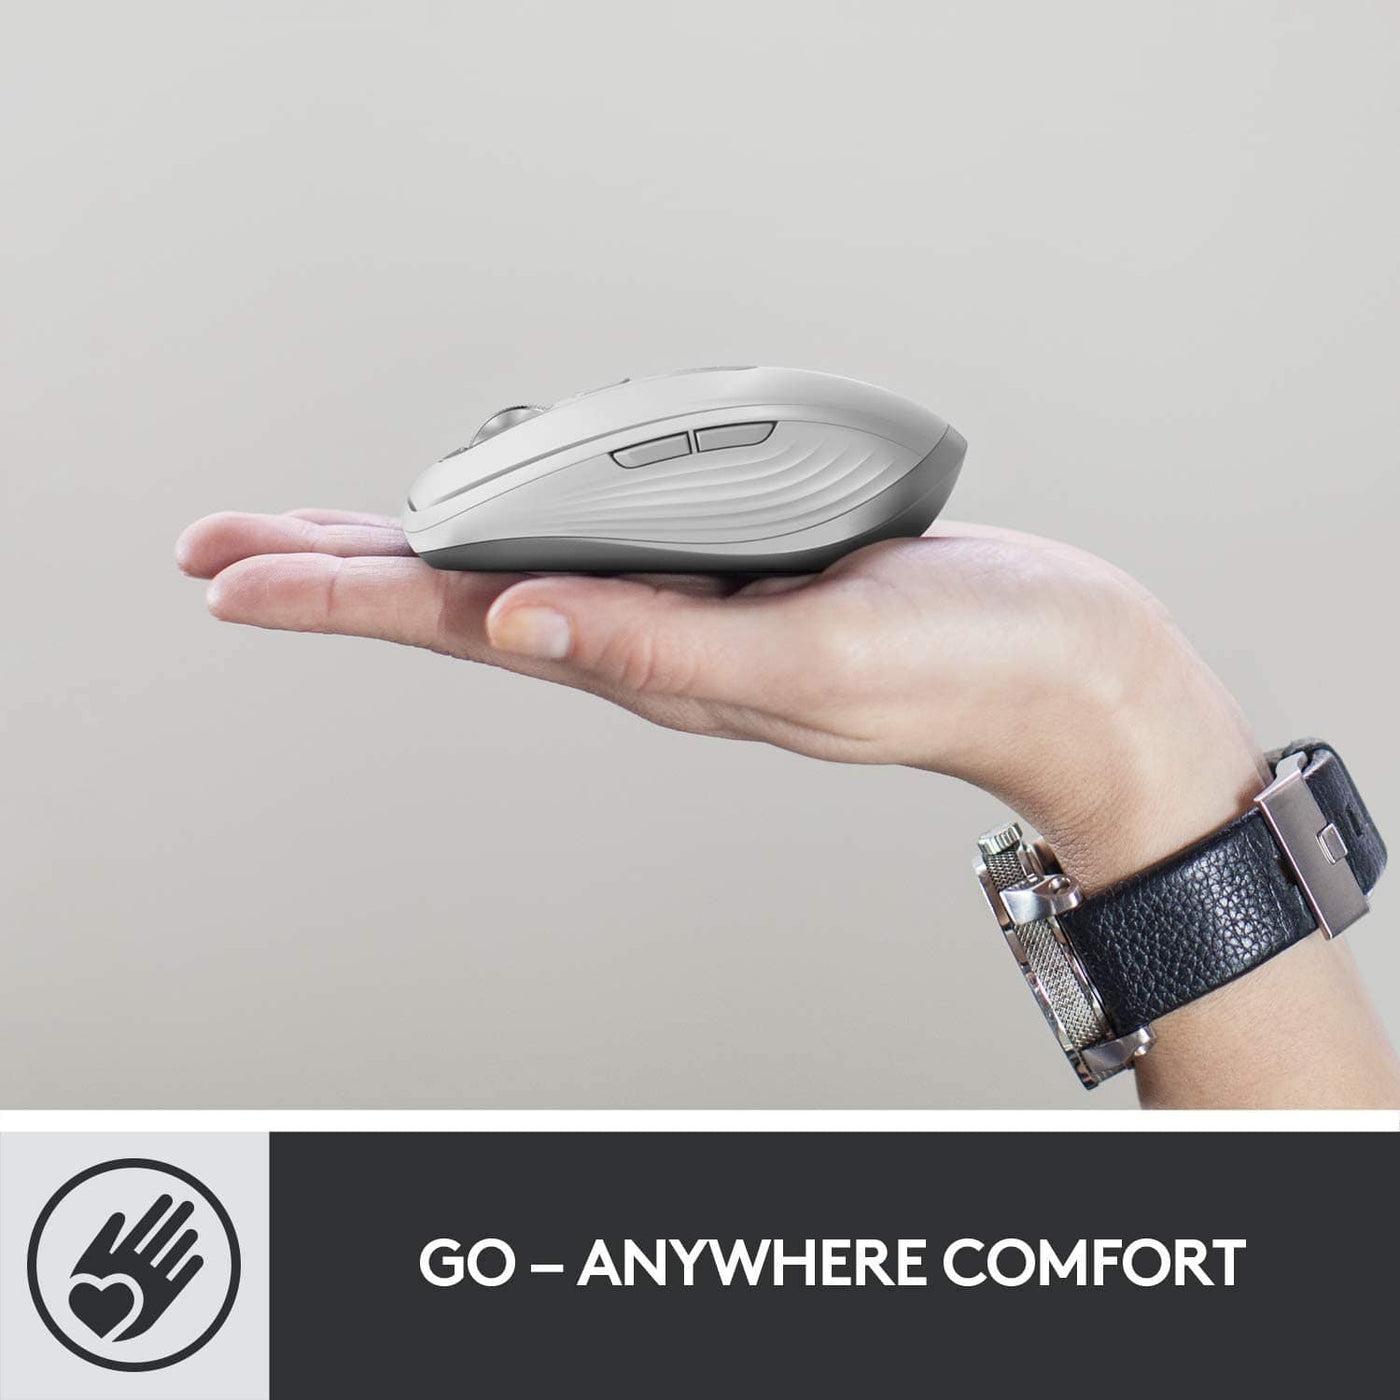 Logitech MX Anywhere 3 Compact Performance Mouse - Wireless, Fast Scrolling - Smart Tech Shopping